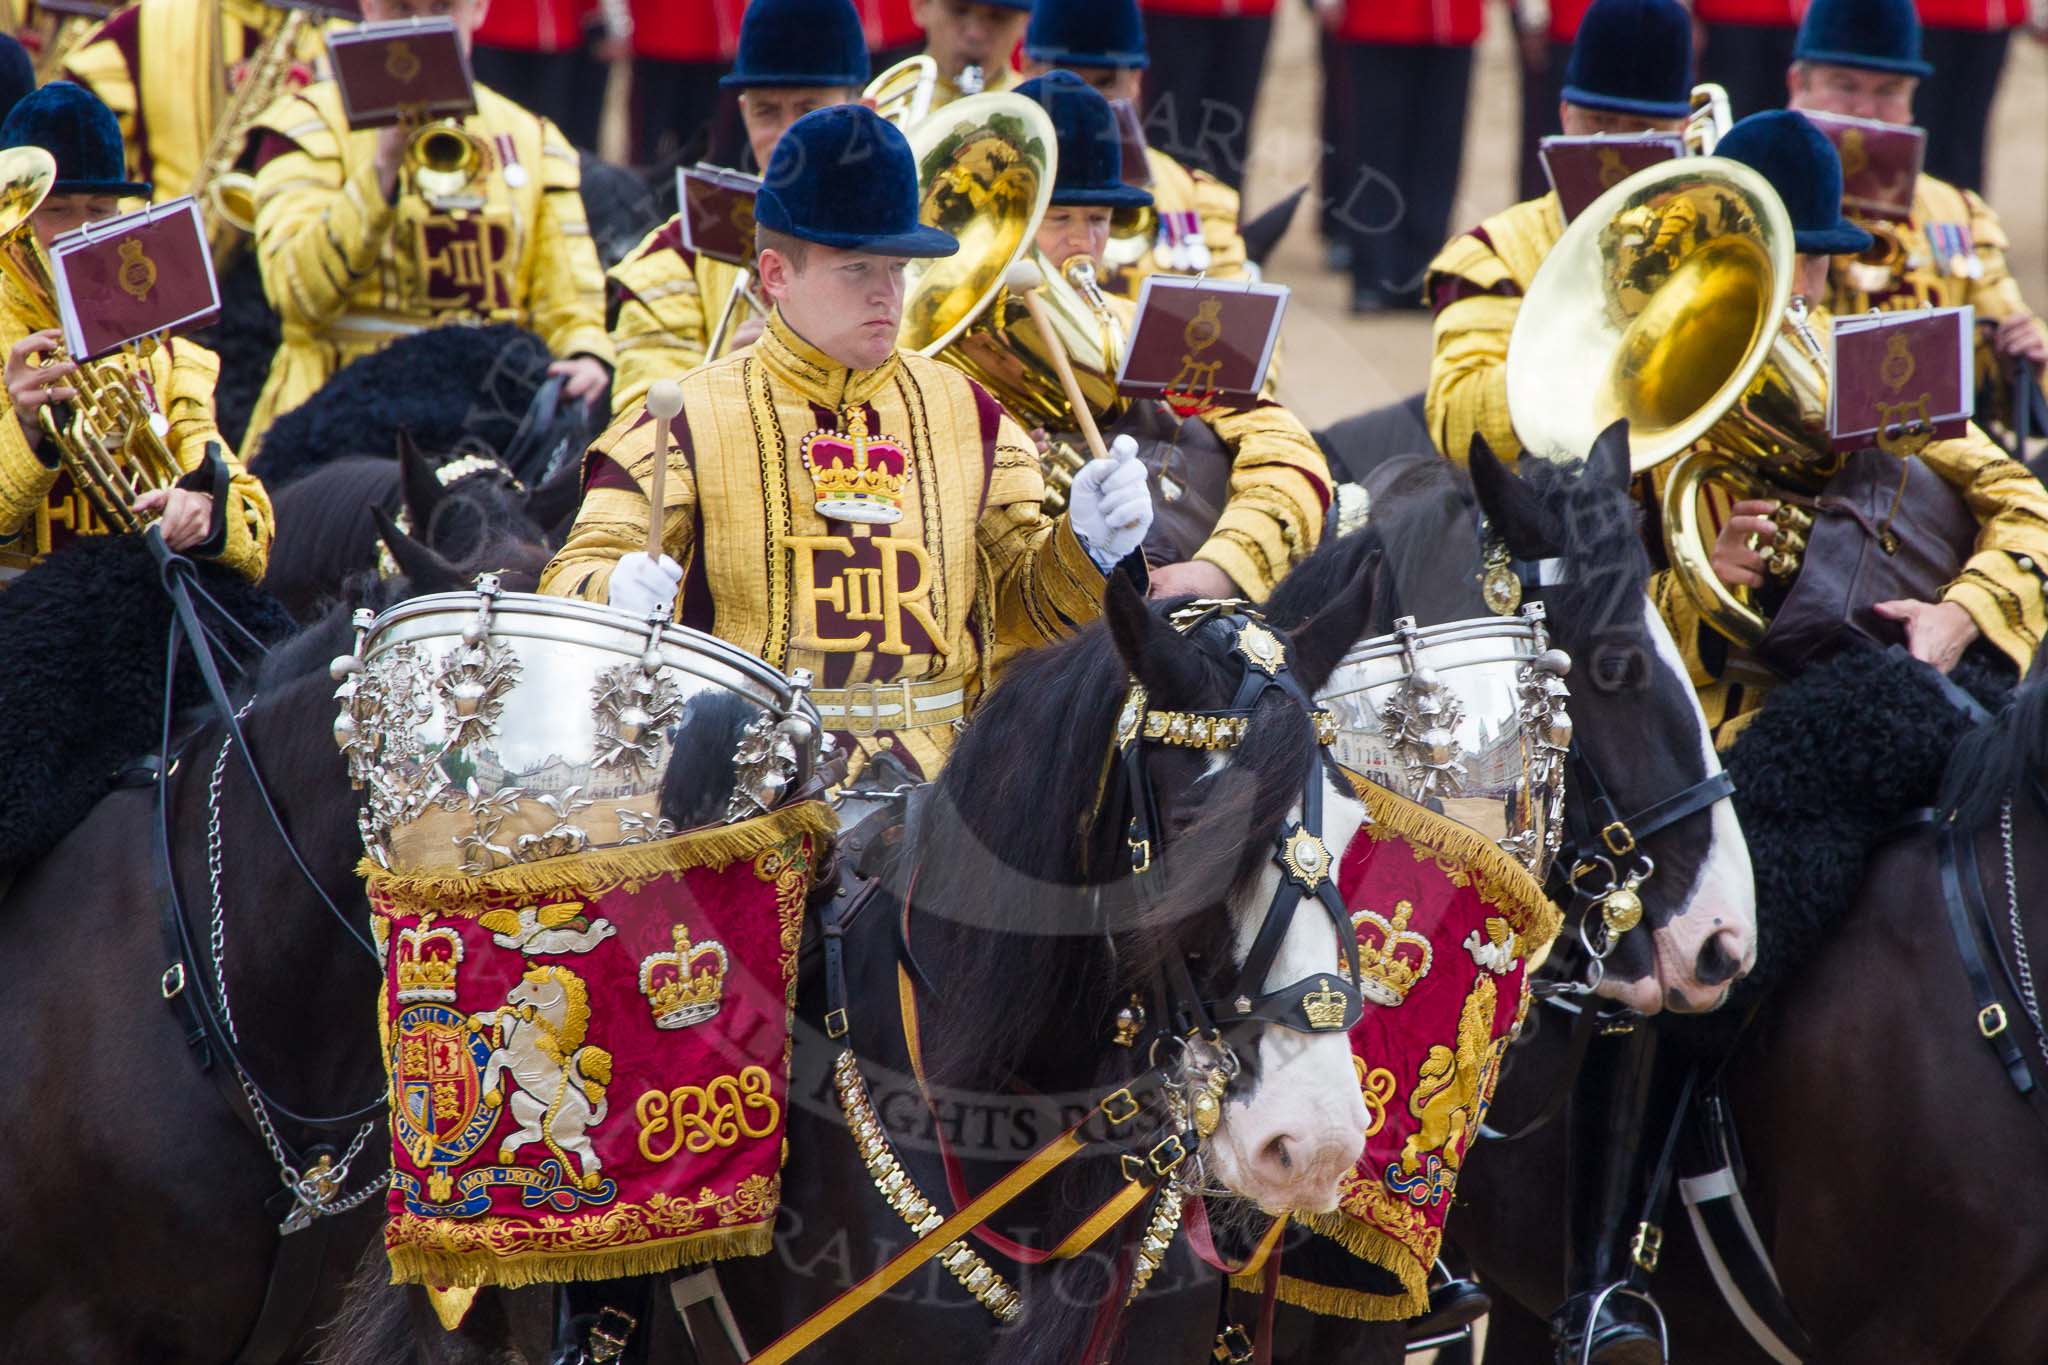 Trooping the Colour 2014.
Horse Guards Parade, Westminster,
London SW1A,

United Kingdom,
on 14 June 2014 at 11:59, image #792